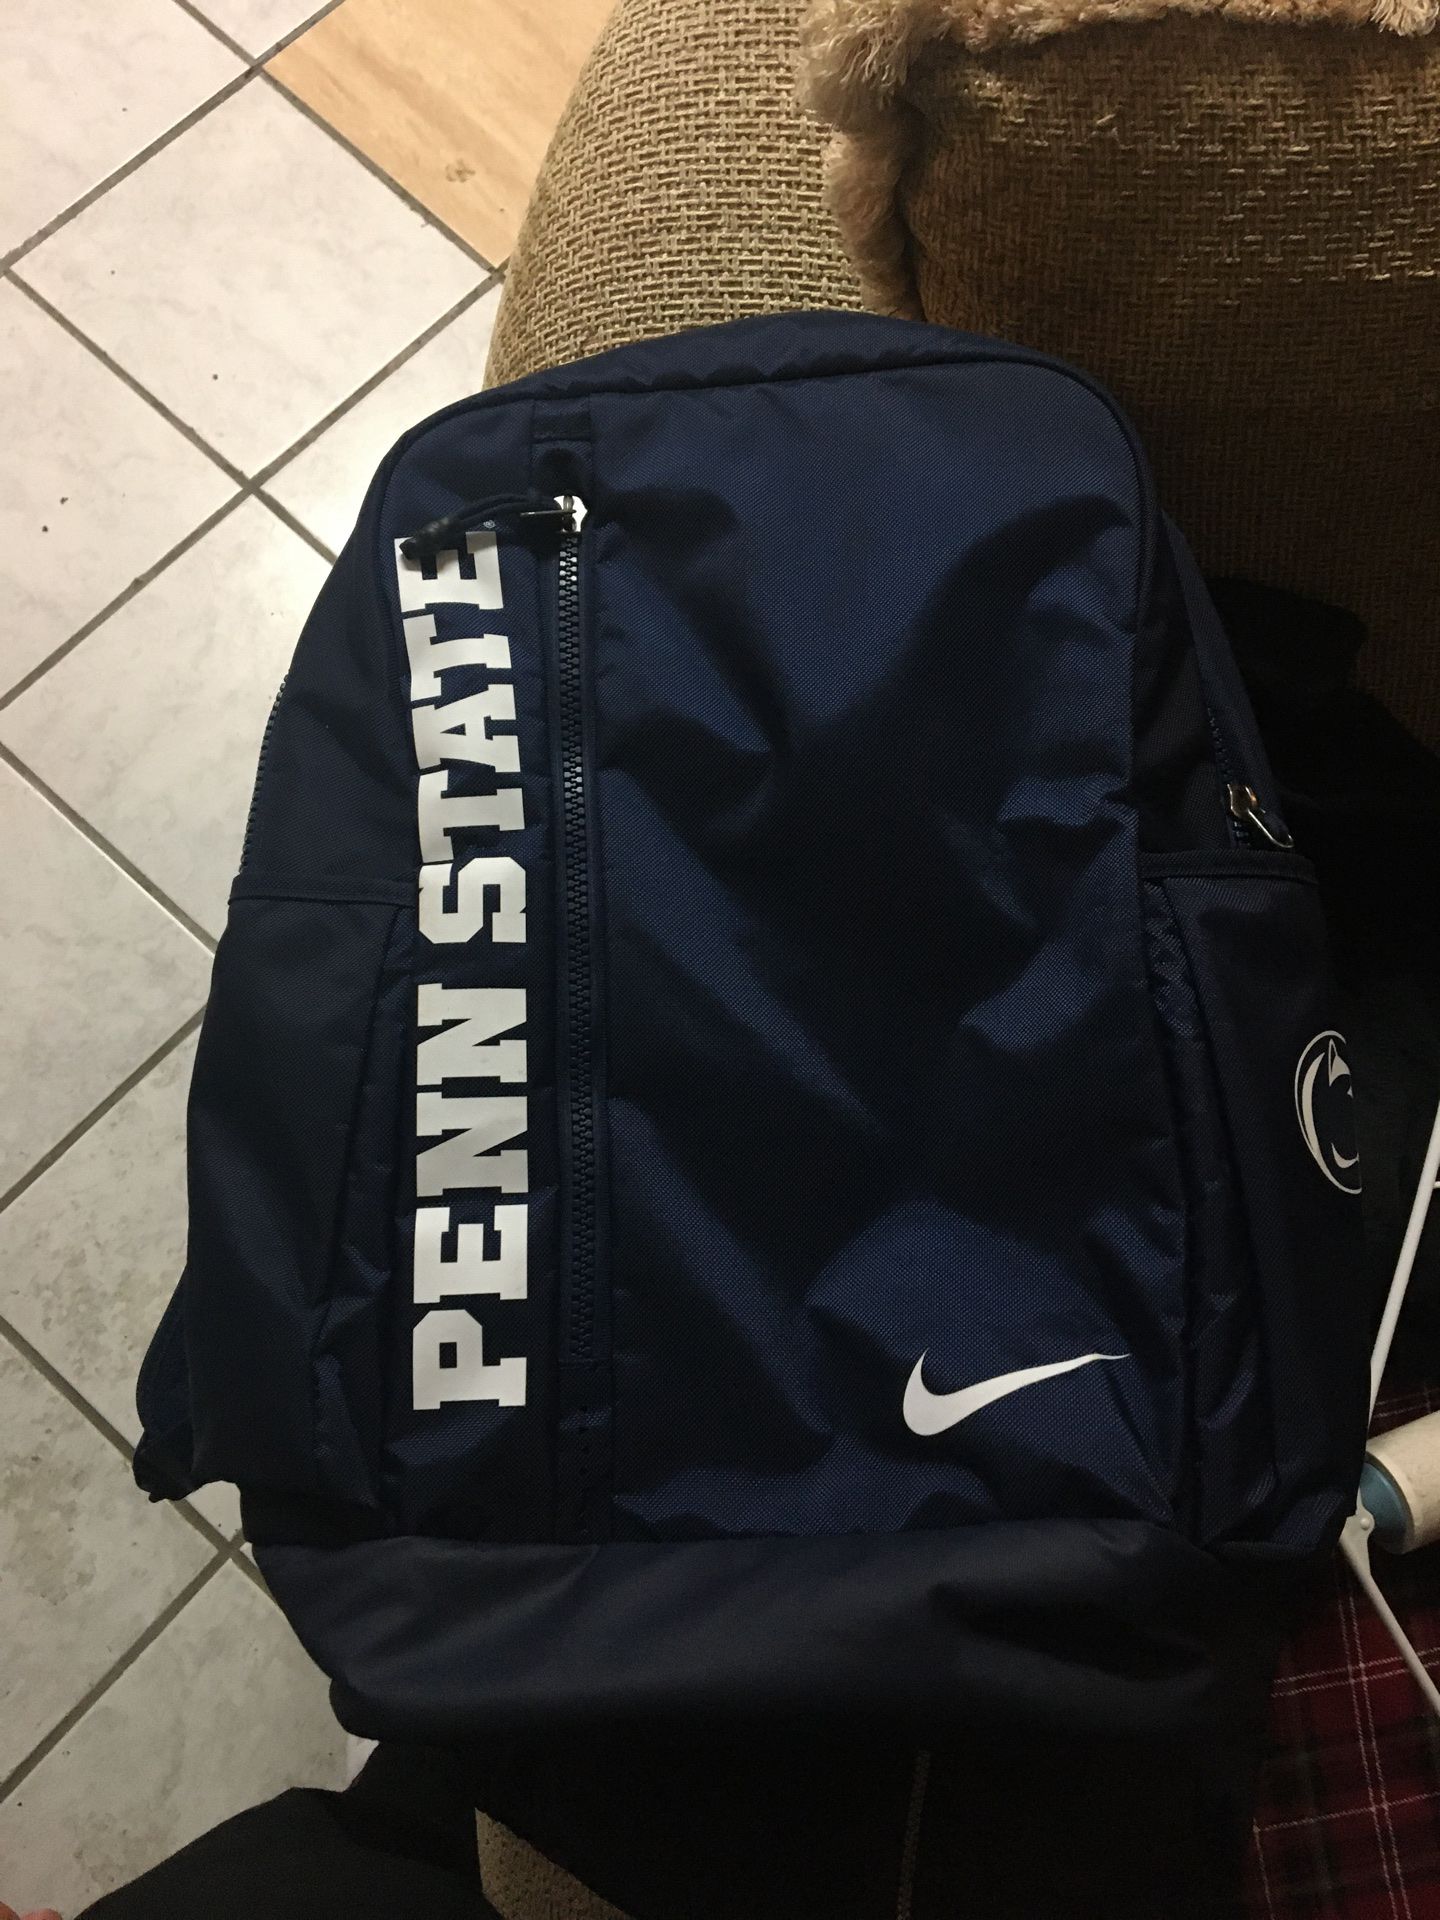 Penn State Nike backpack navy color way